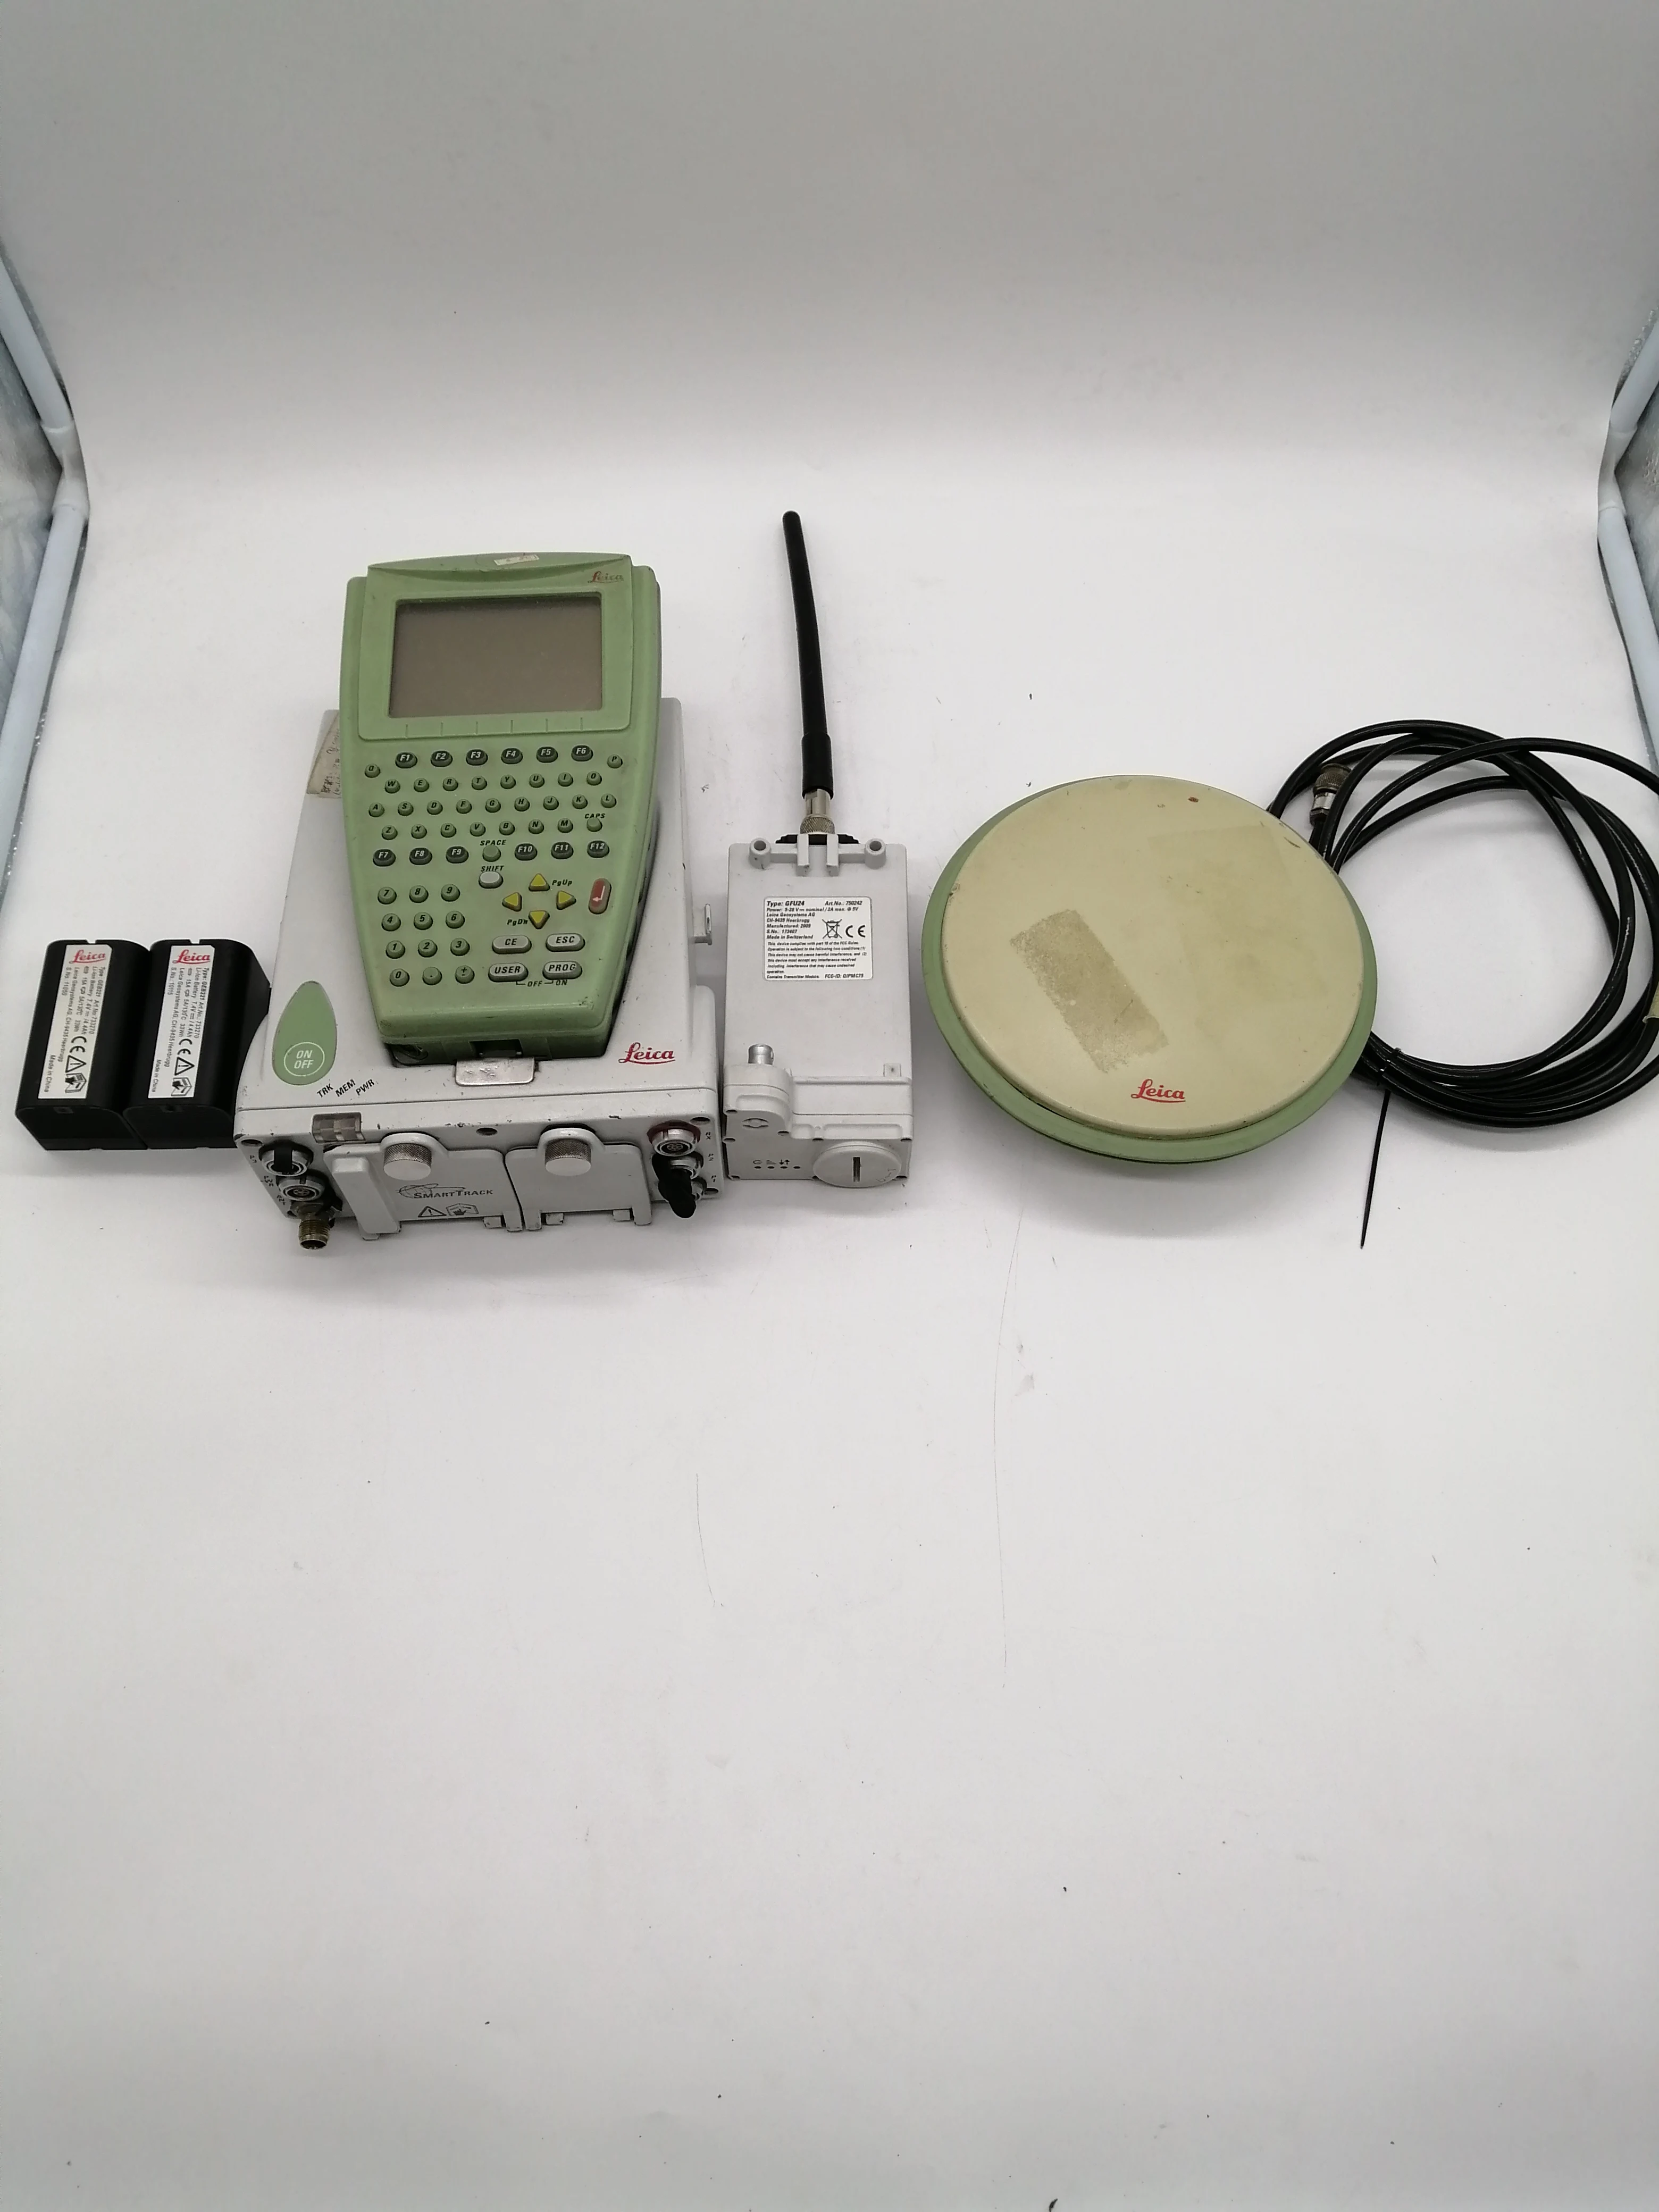 Gps Leica System 1200 Gps For Surveying Instrument - Wire Edm Machine - AliExpress